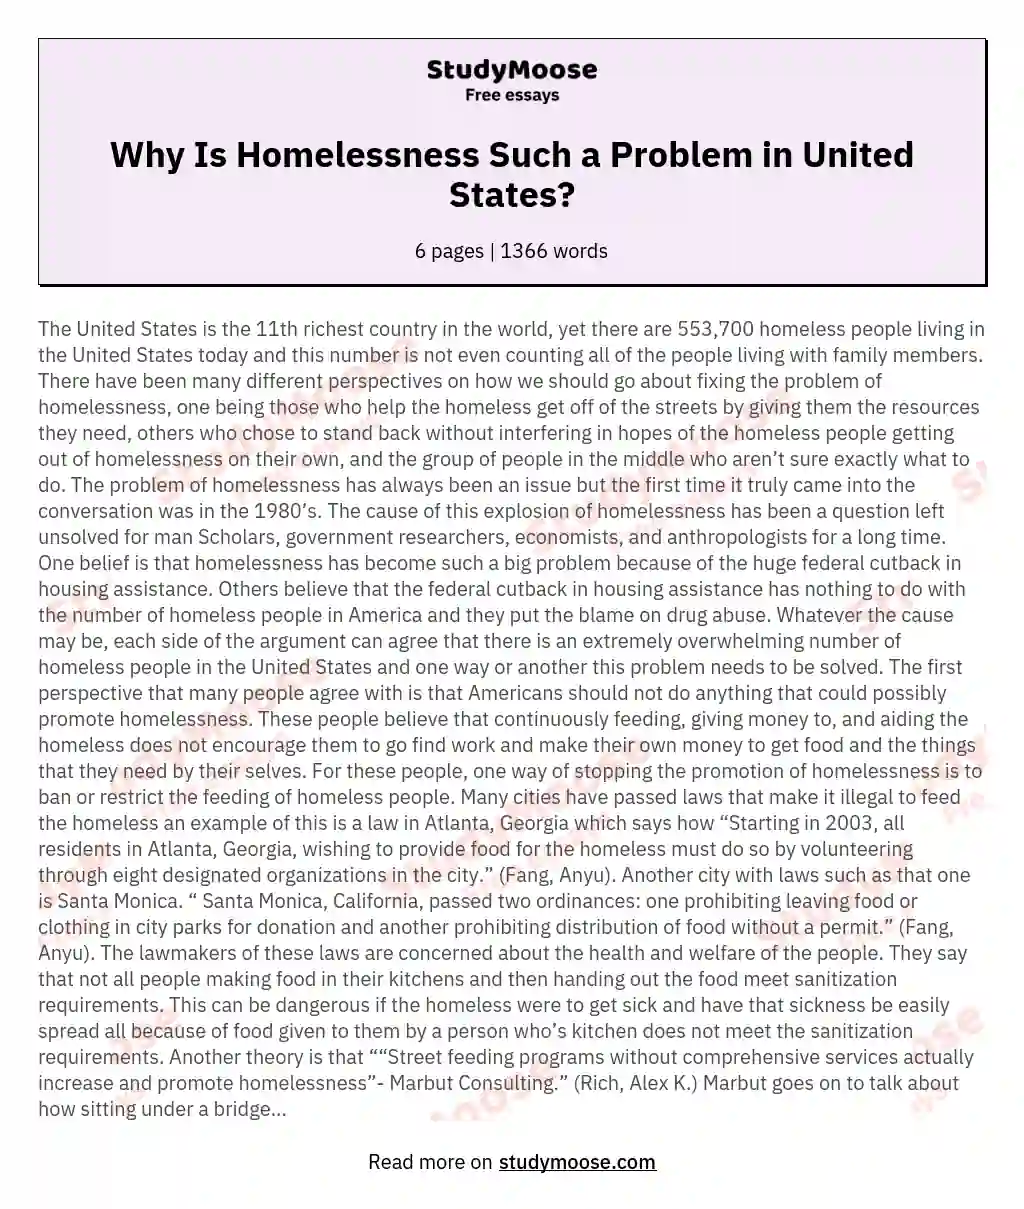 Why Is Homelessness Such a Problem in United States? essay